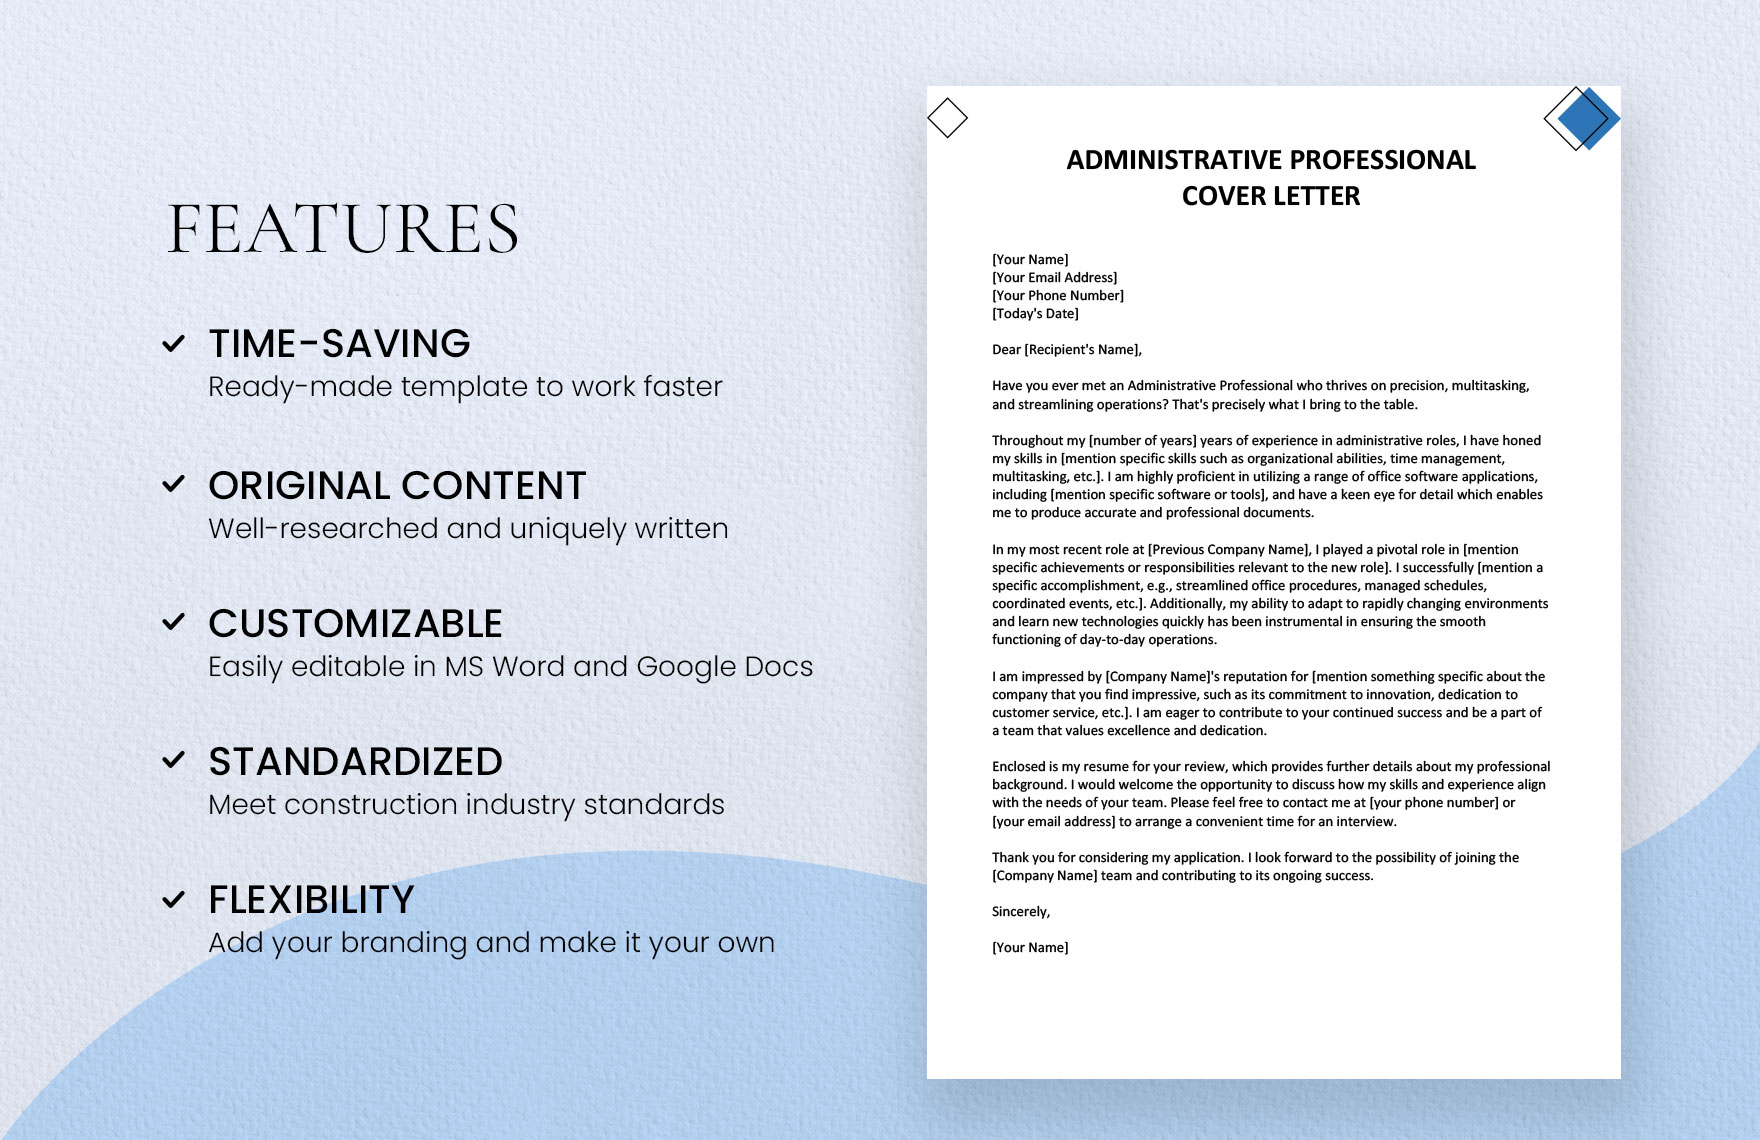 Administrative Professional Cover Letter